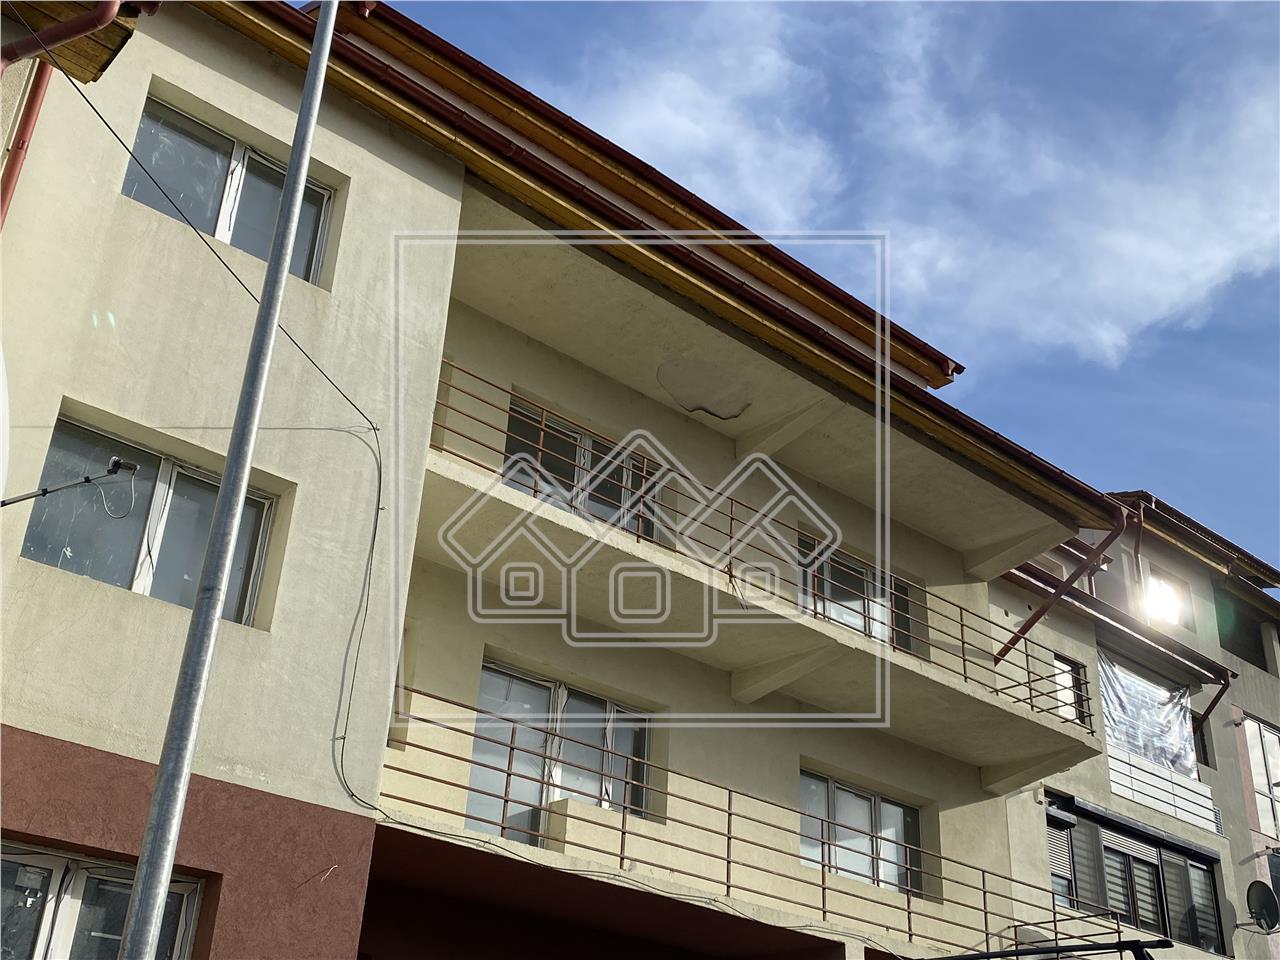 Villa with 3 apartments for sale in Sibiu - garage / apartment -